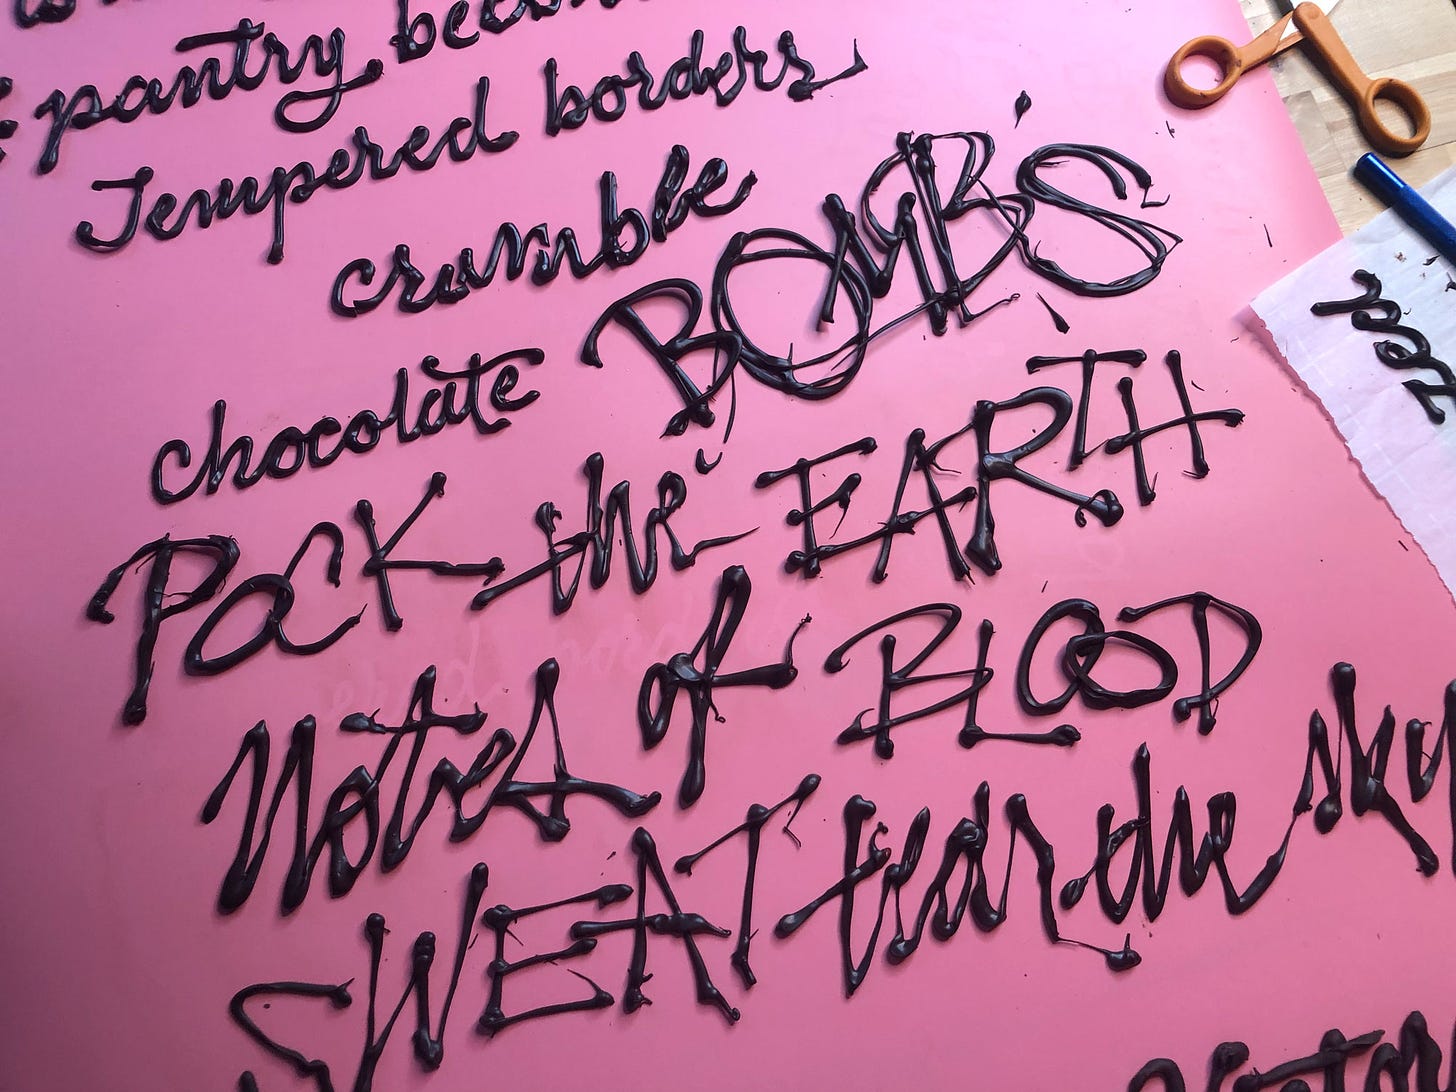 Chocolate words are piped onto a smooth background. In the top right corner is parchment paper with leftover letters and a pair of scissors. It says "tempered borders crumble / chocolate BOMBS / POCK the EARTH / Notes of BLOOD / SWEAT / tear the sky"